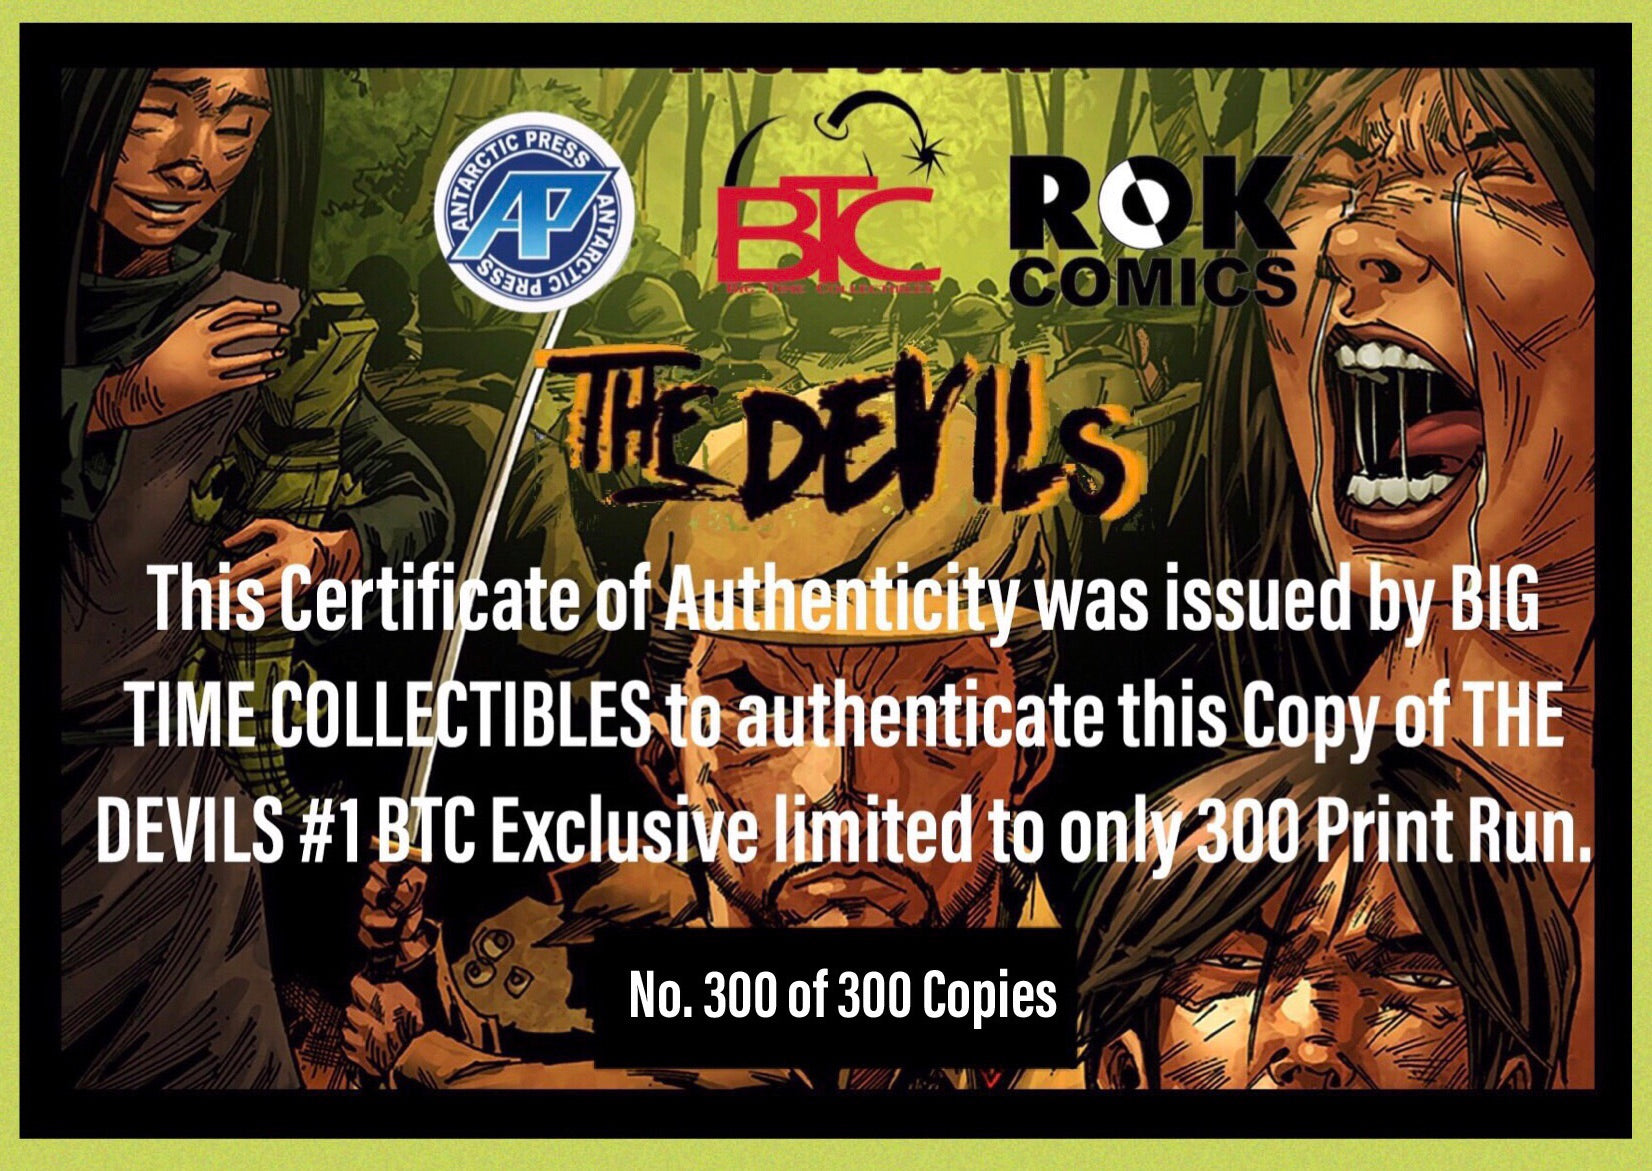 THE DEVILS #1 BTC EXCLUSIVE LIMITED TO 300 COPIES PRINT RUN 02/13/19